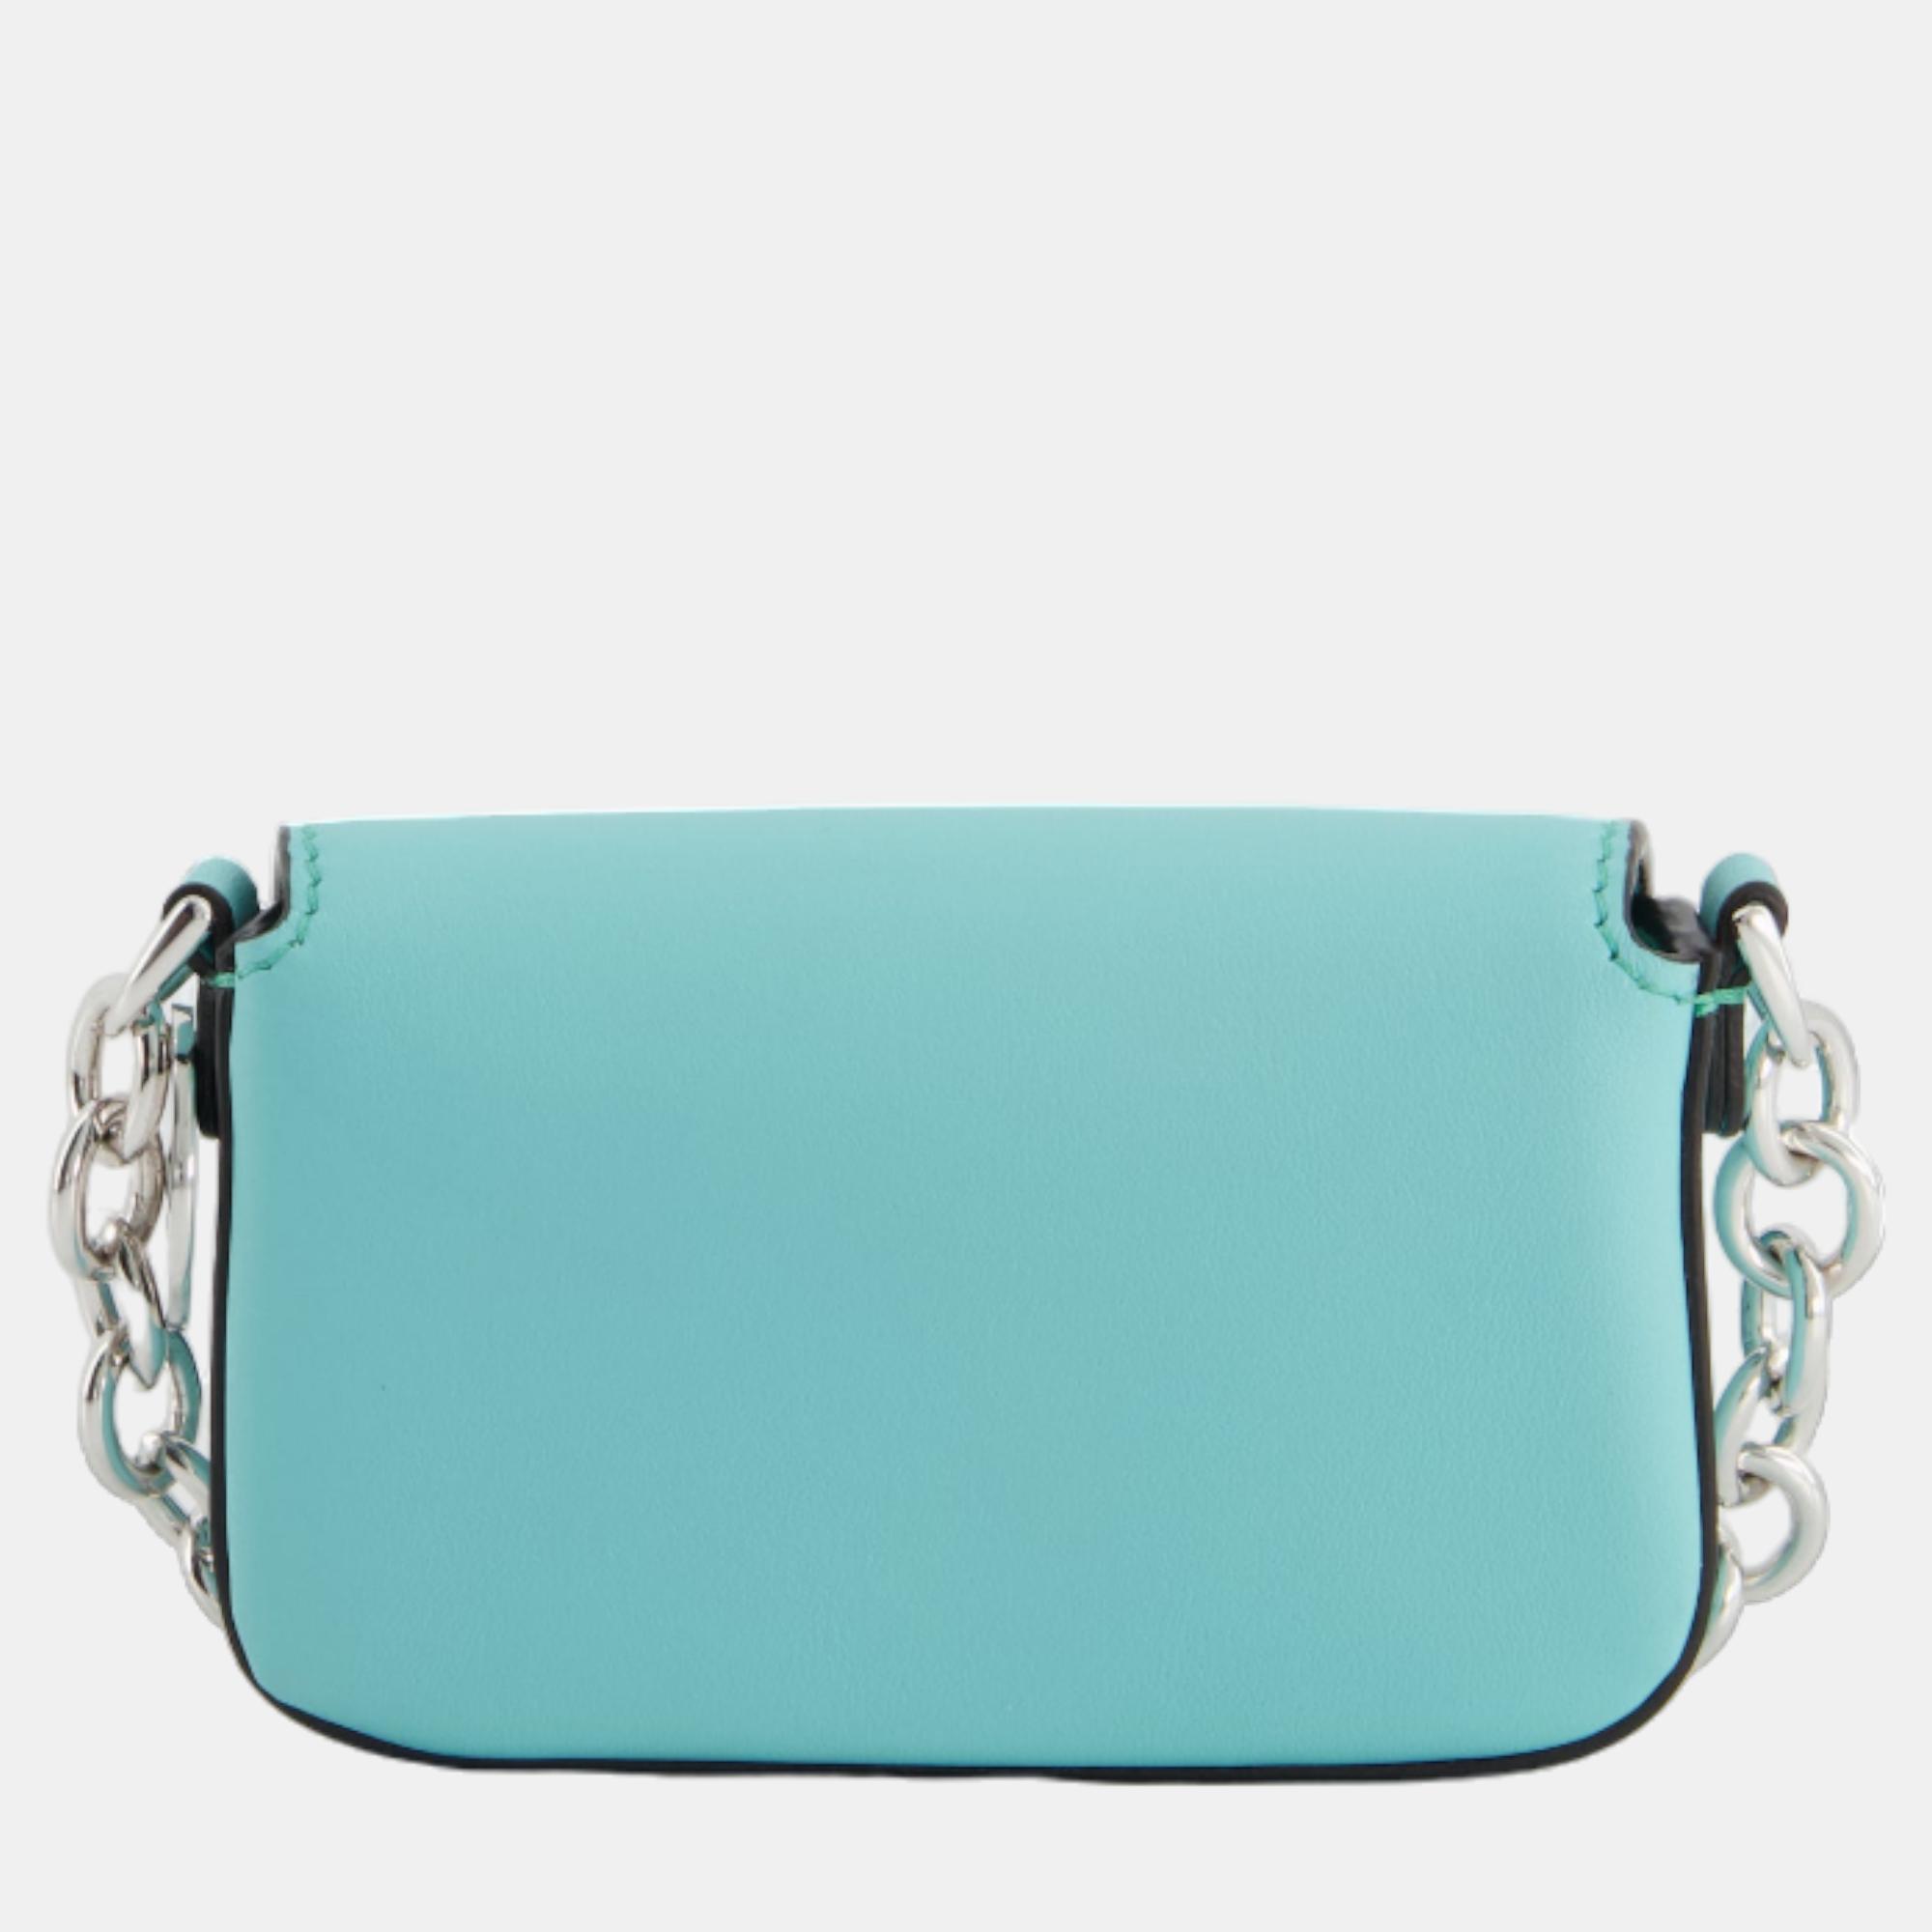 Fendi X Tiffany&Co Tiffany Blue Leather Nano Baguette Bag With Sterling Silver Hardware And Tiffany Tag